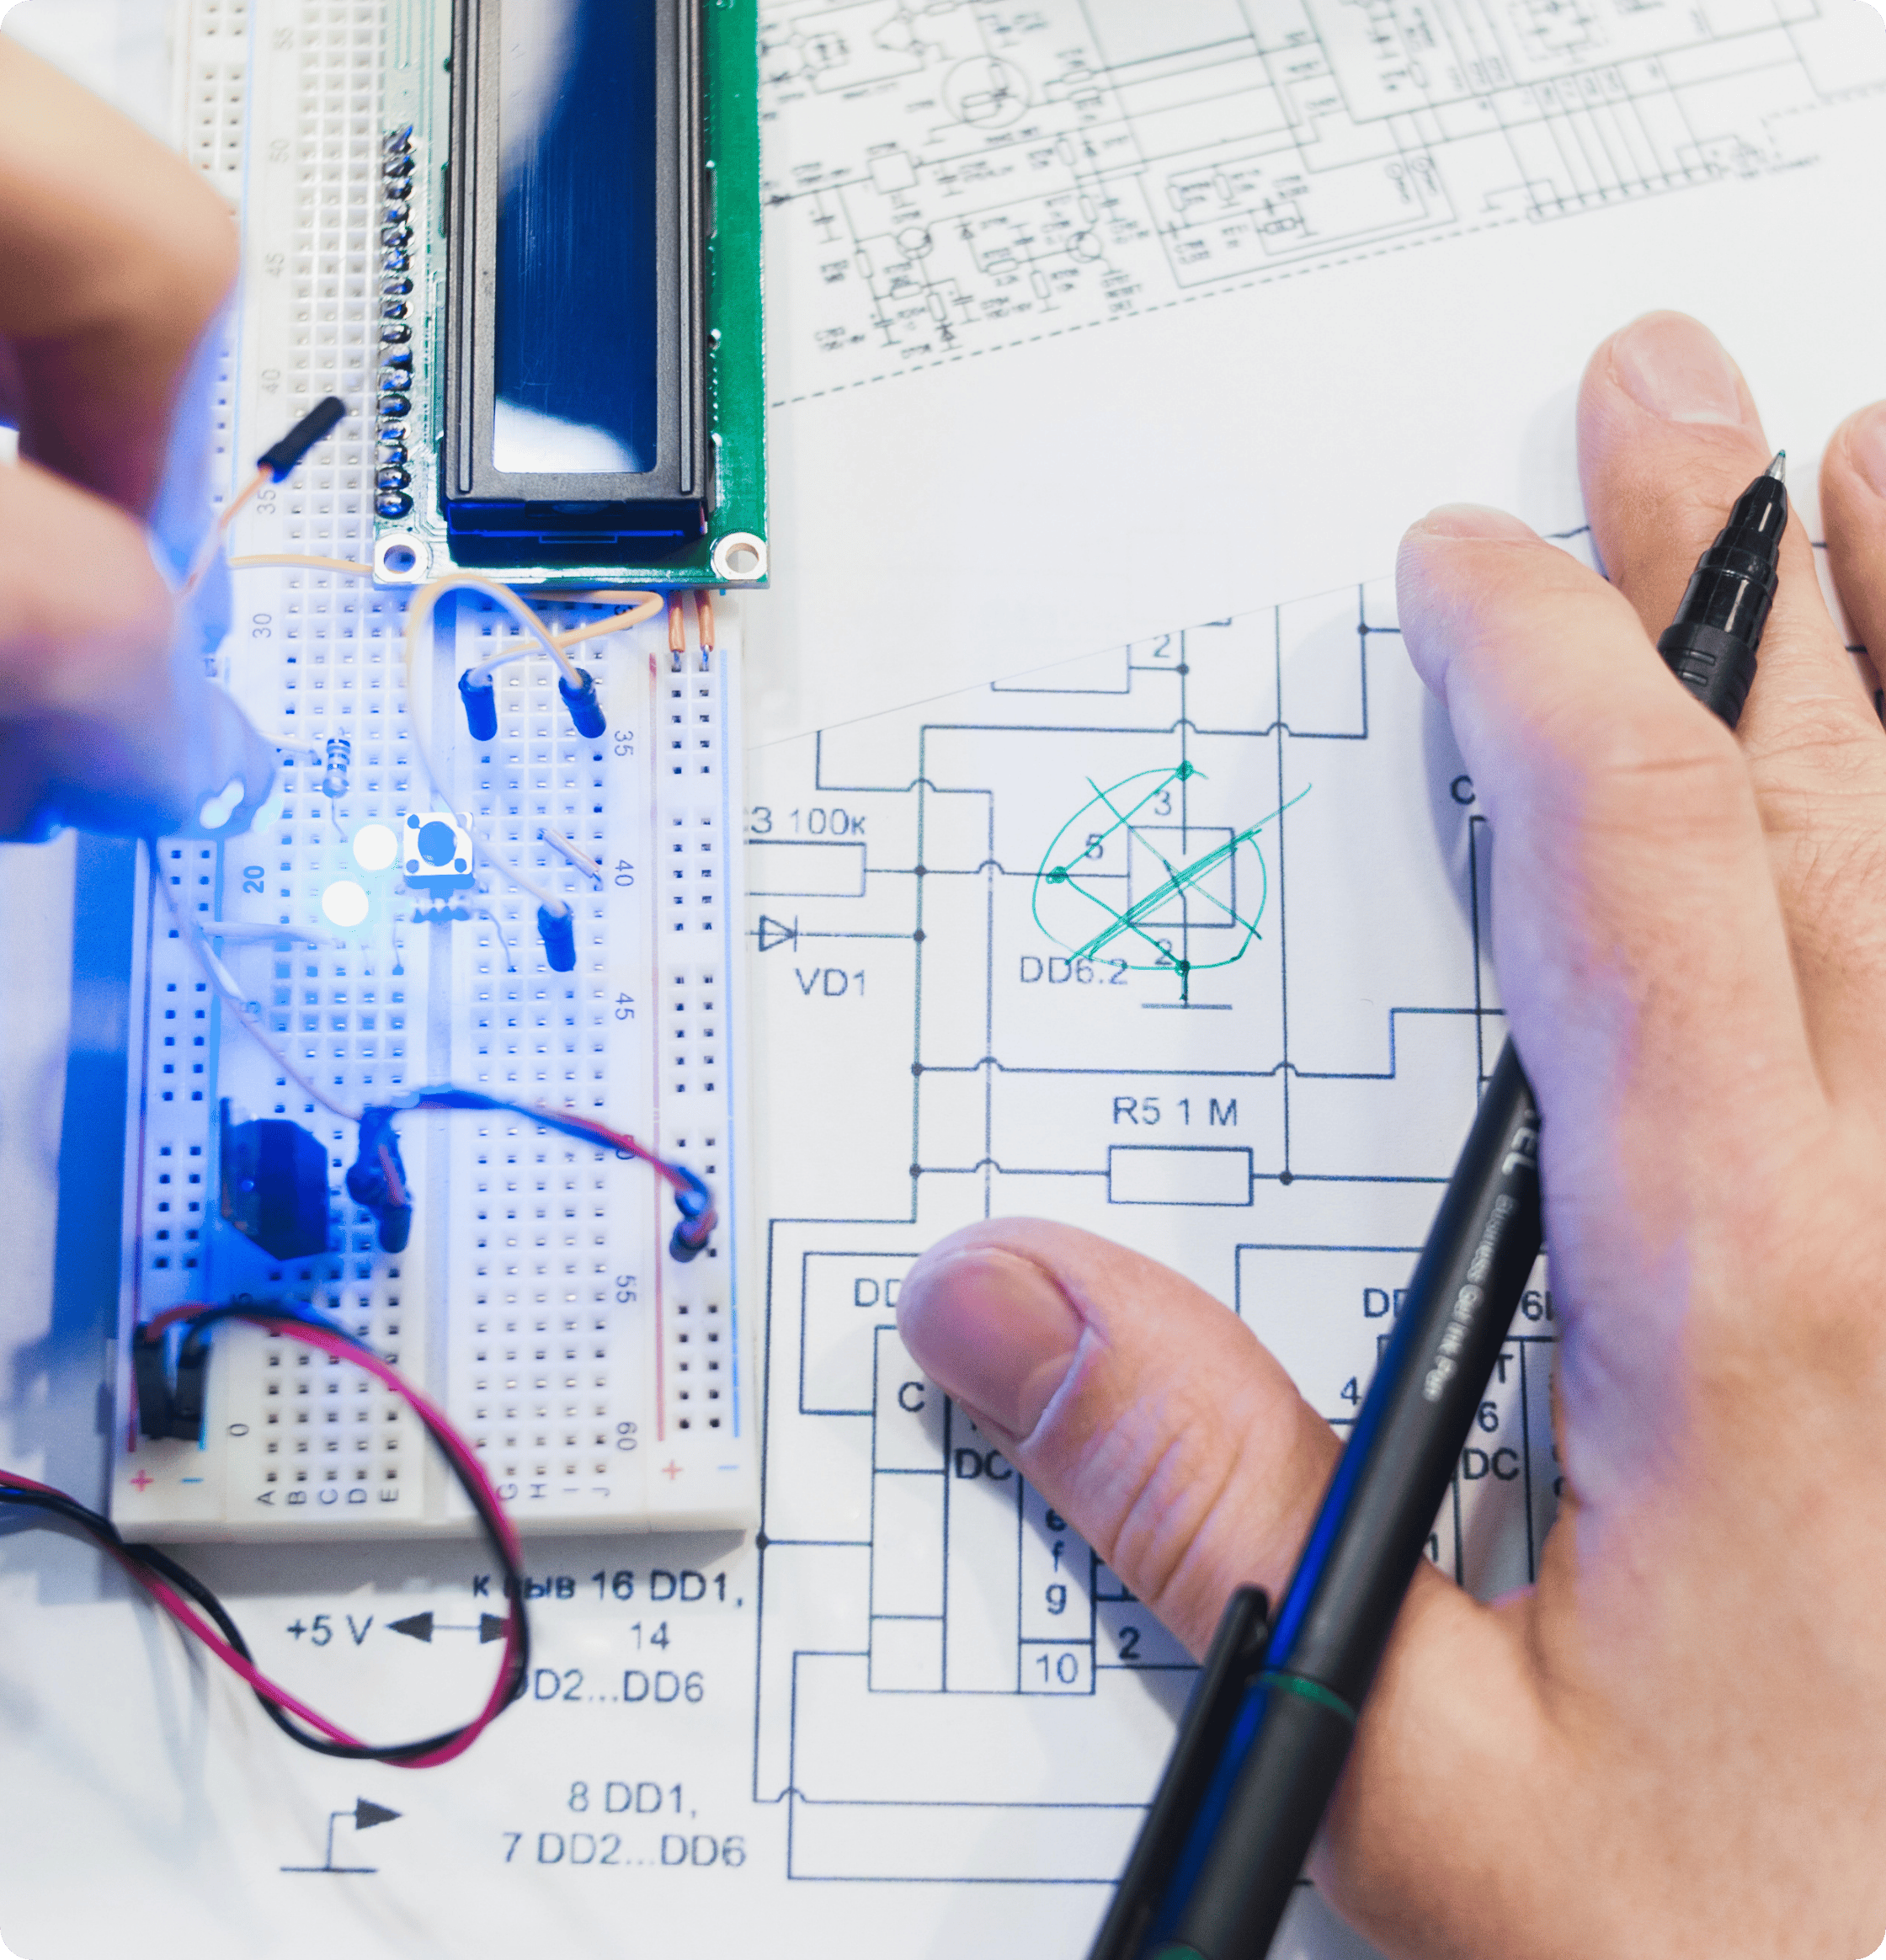 A overhead shot of an engineering working on electronics systems design